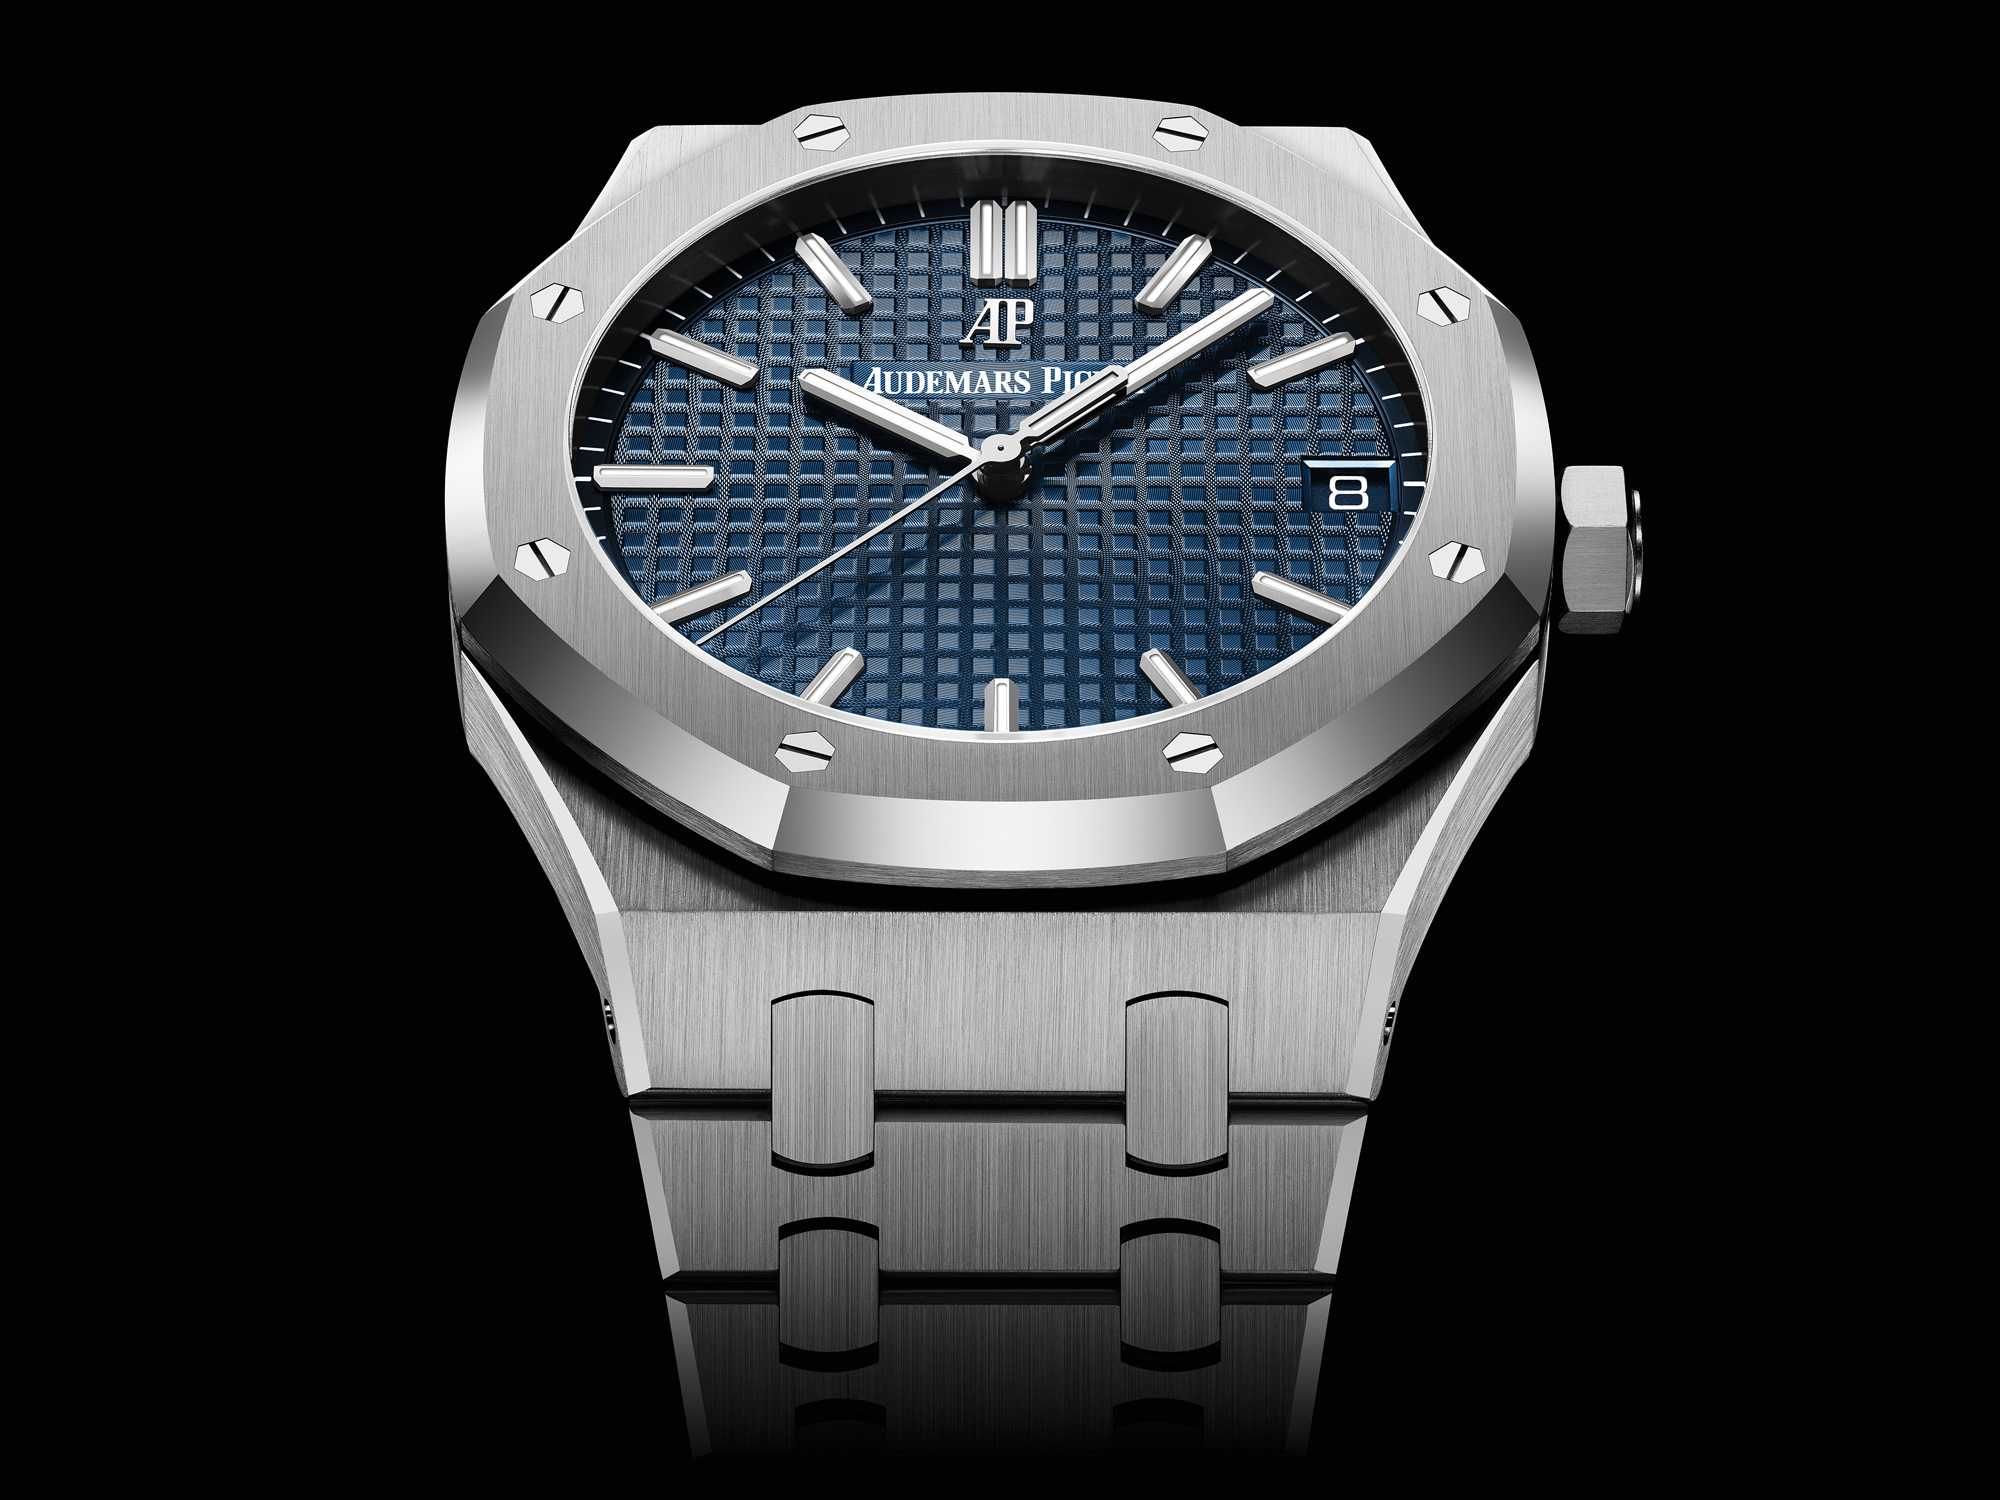 Audemars Piguet to Guarantee $55,000 Watches Against Theft - Bloomberg